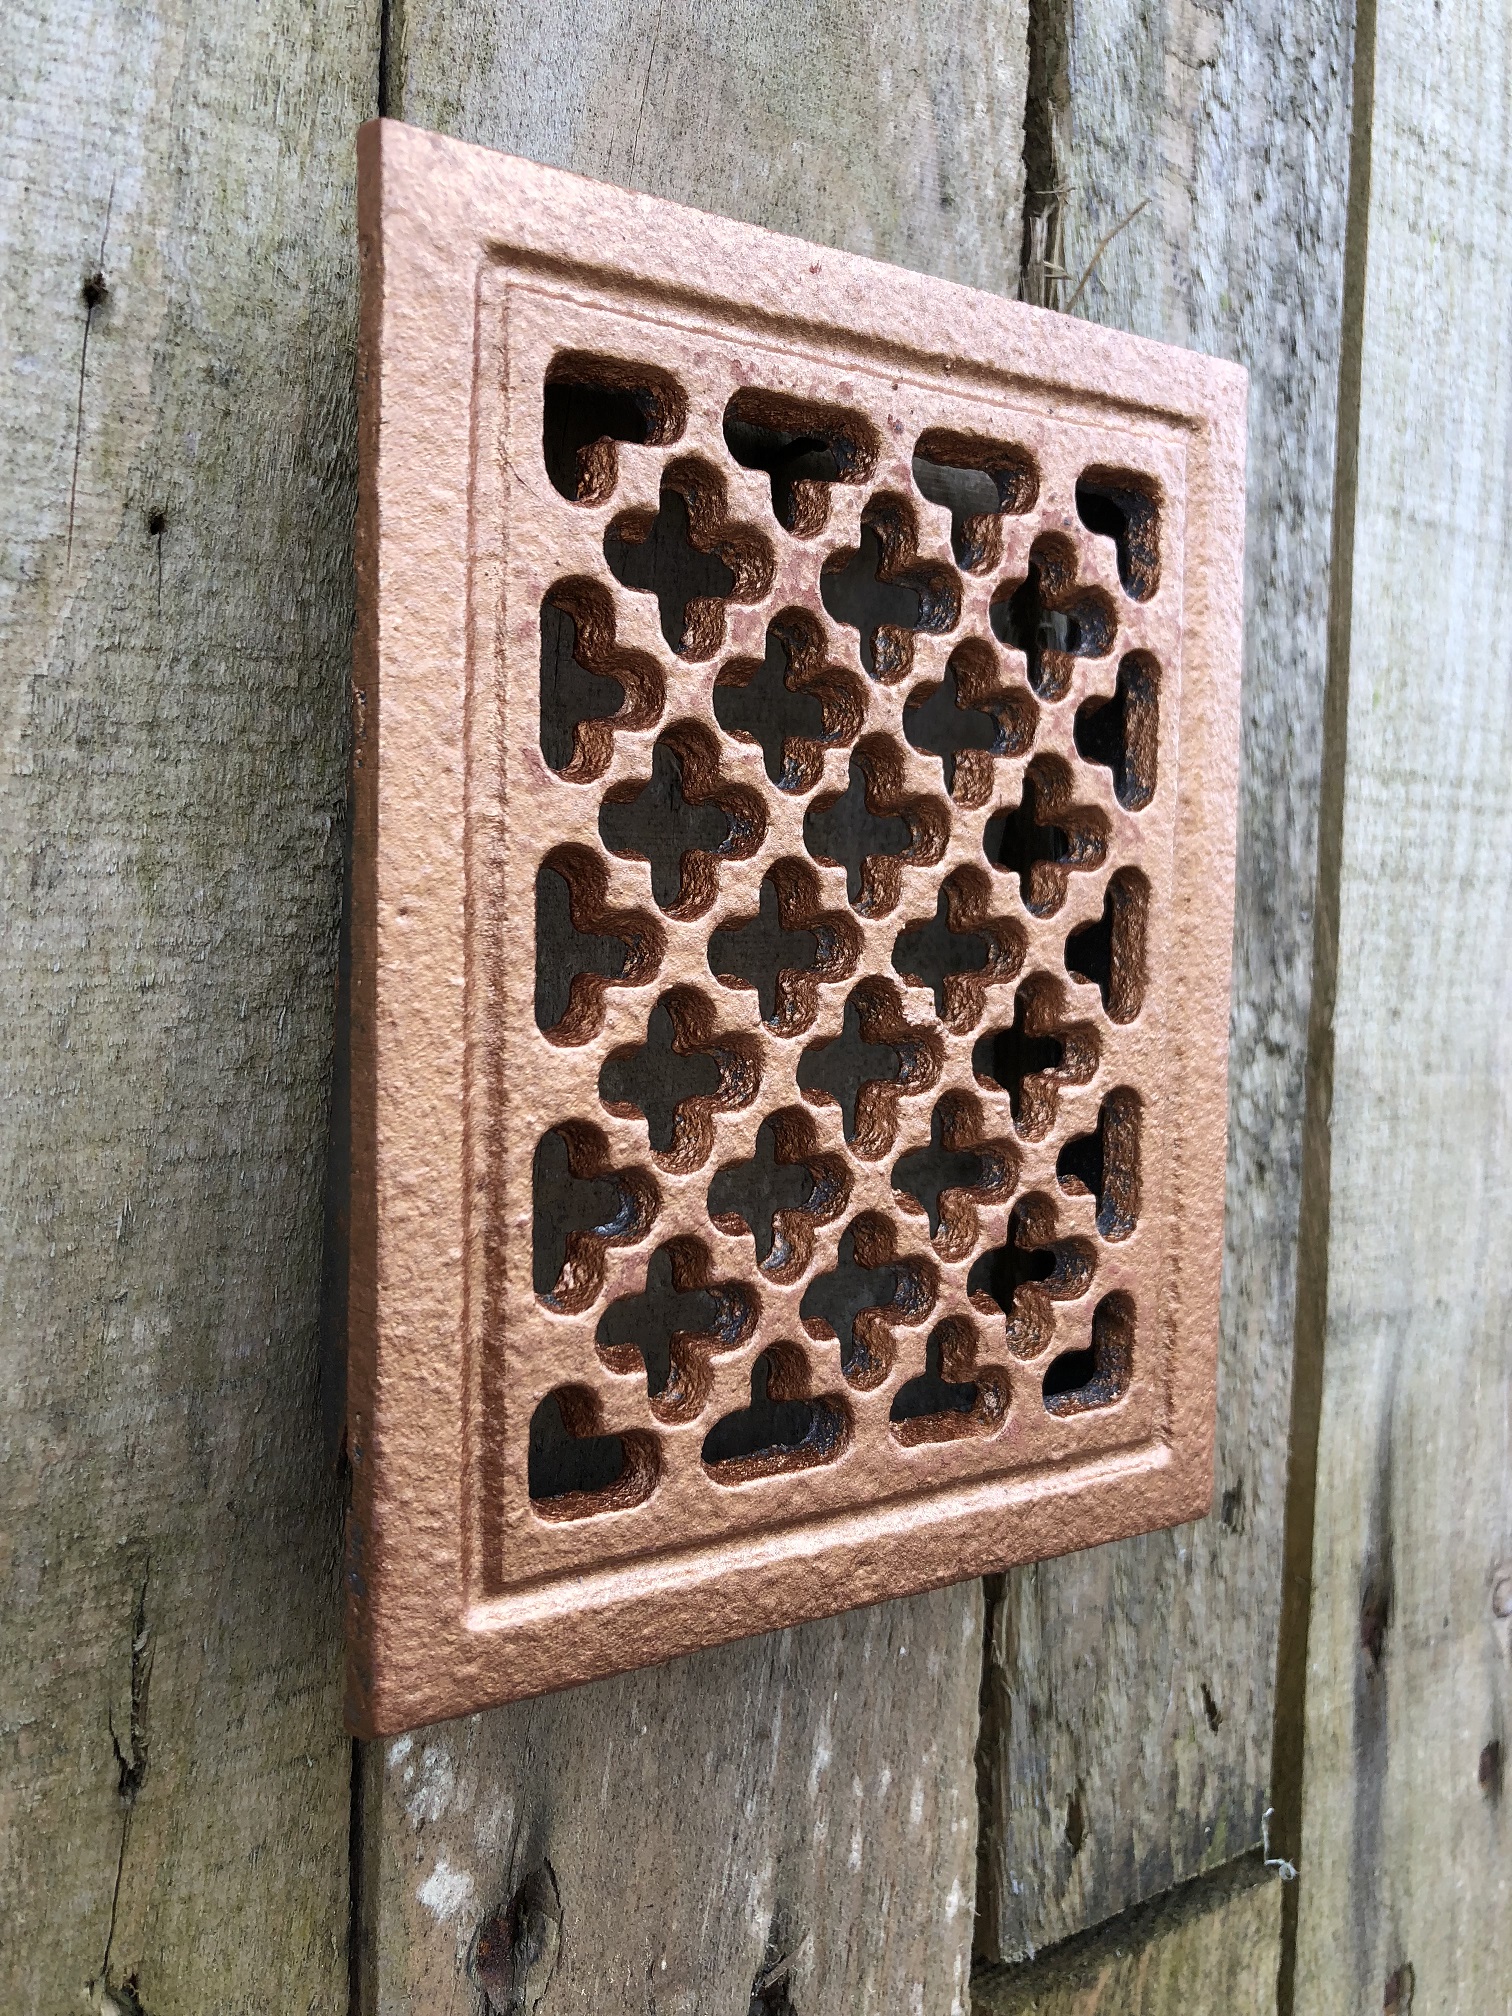 1 hot air/ventilation grille for fireplace, rectangular, cast iron color-bronze-copper